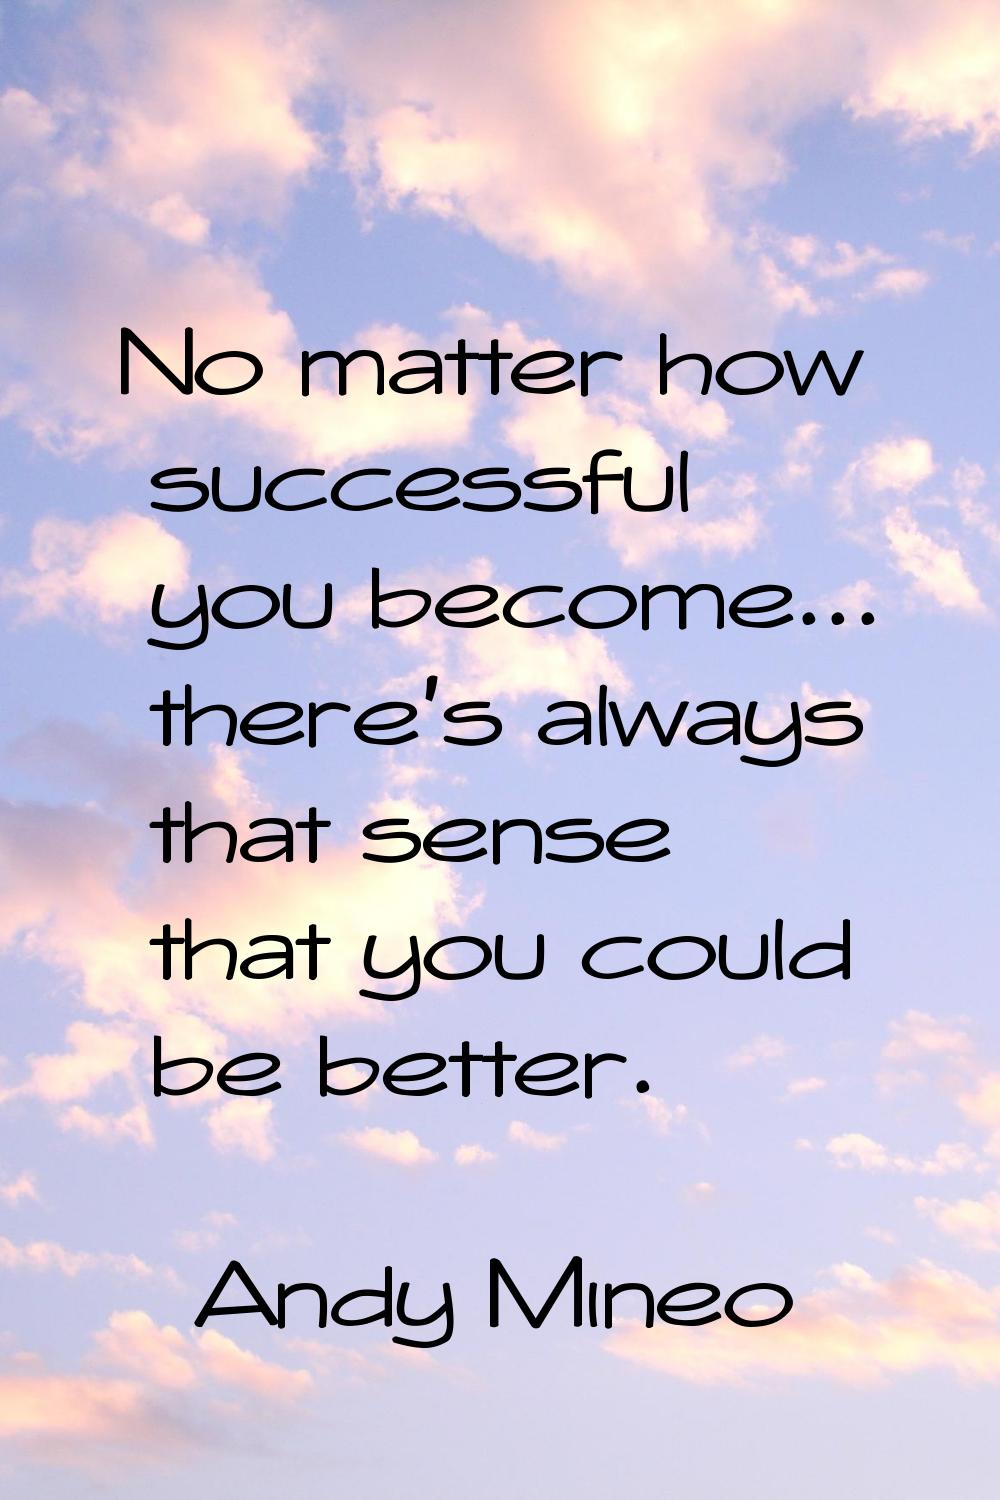 No matter how successful you become... there's always that sense that you could be better.